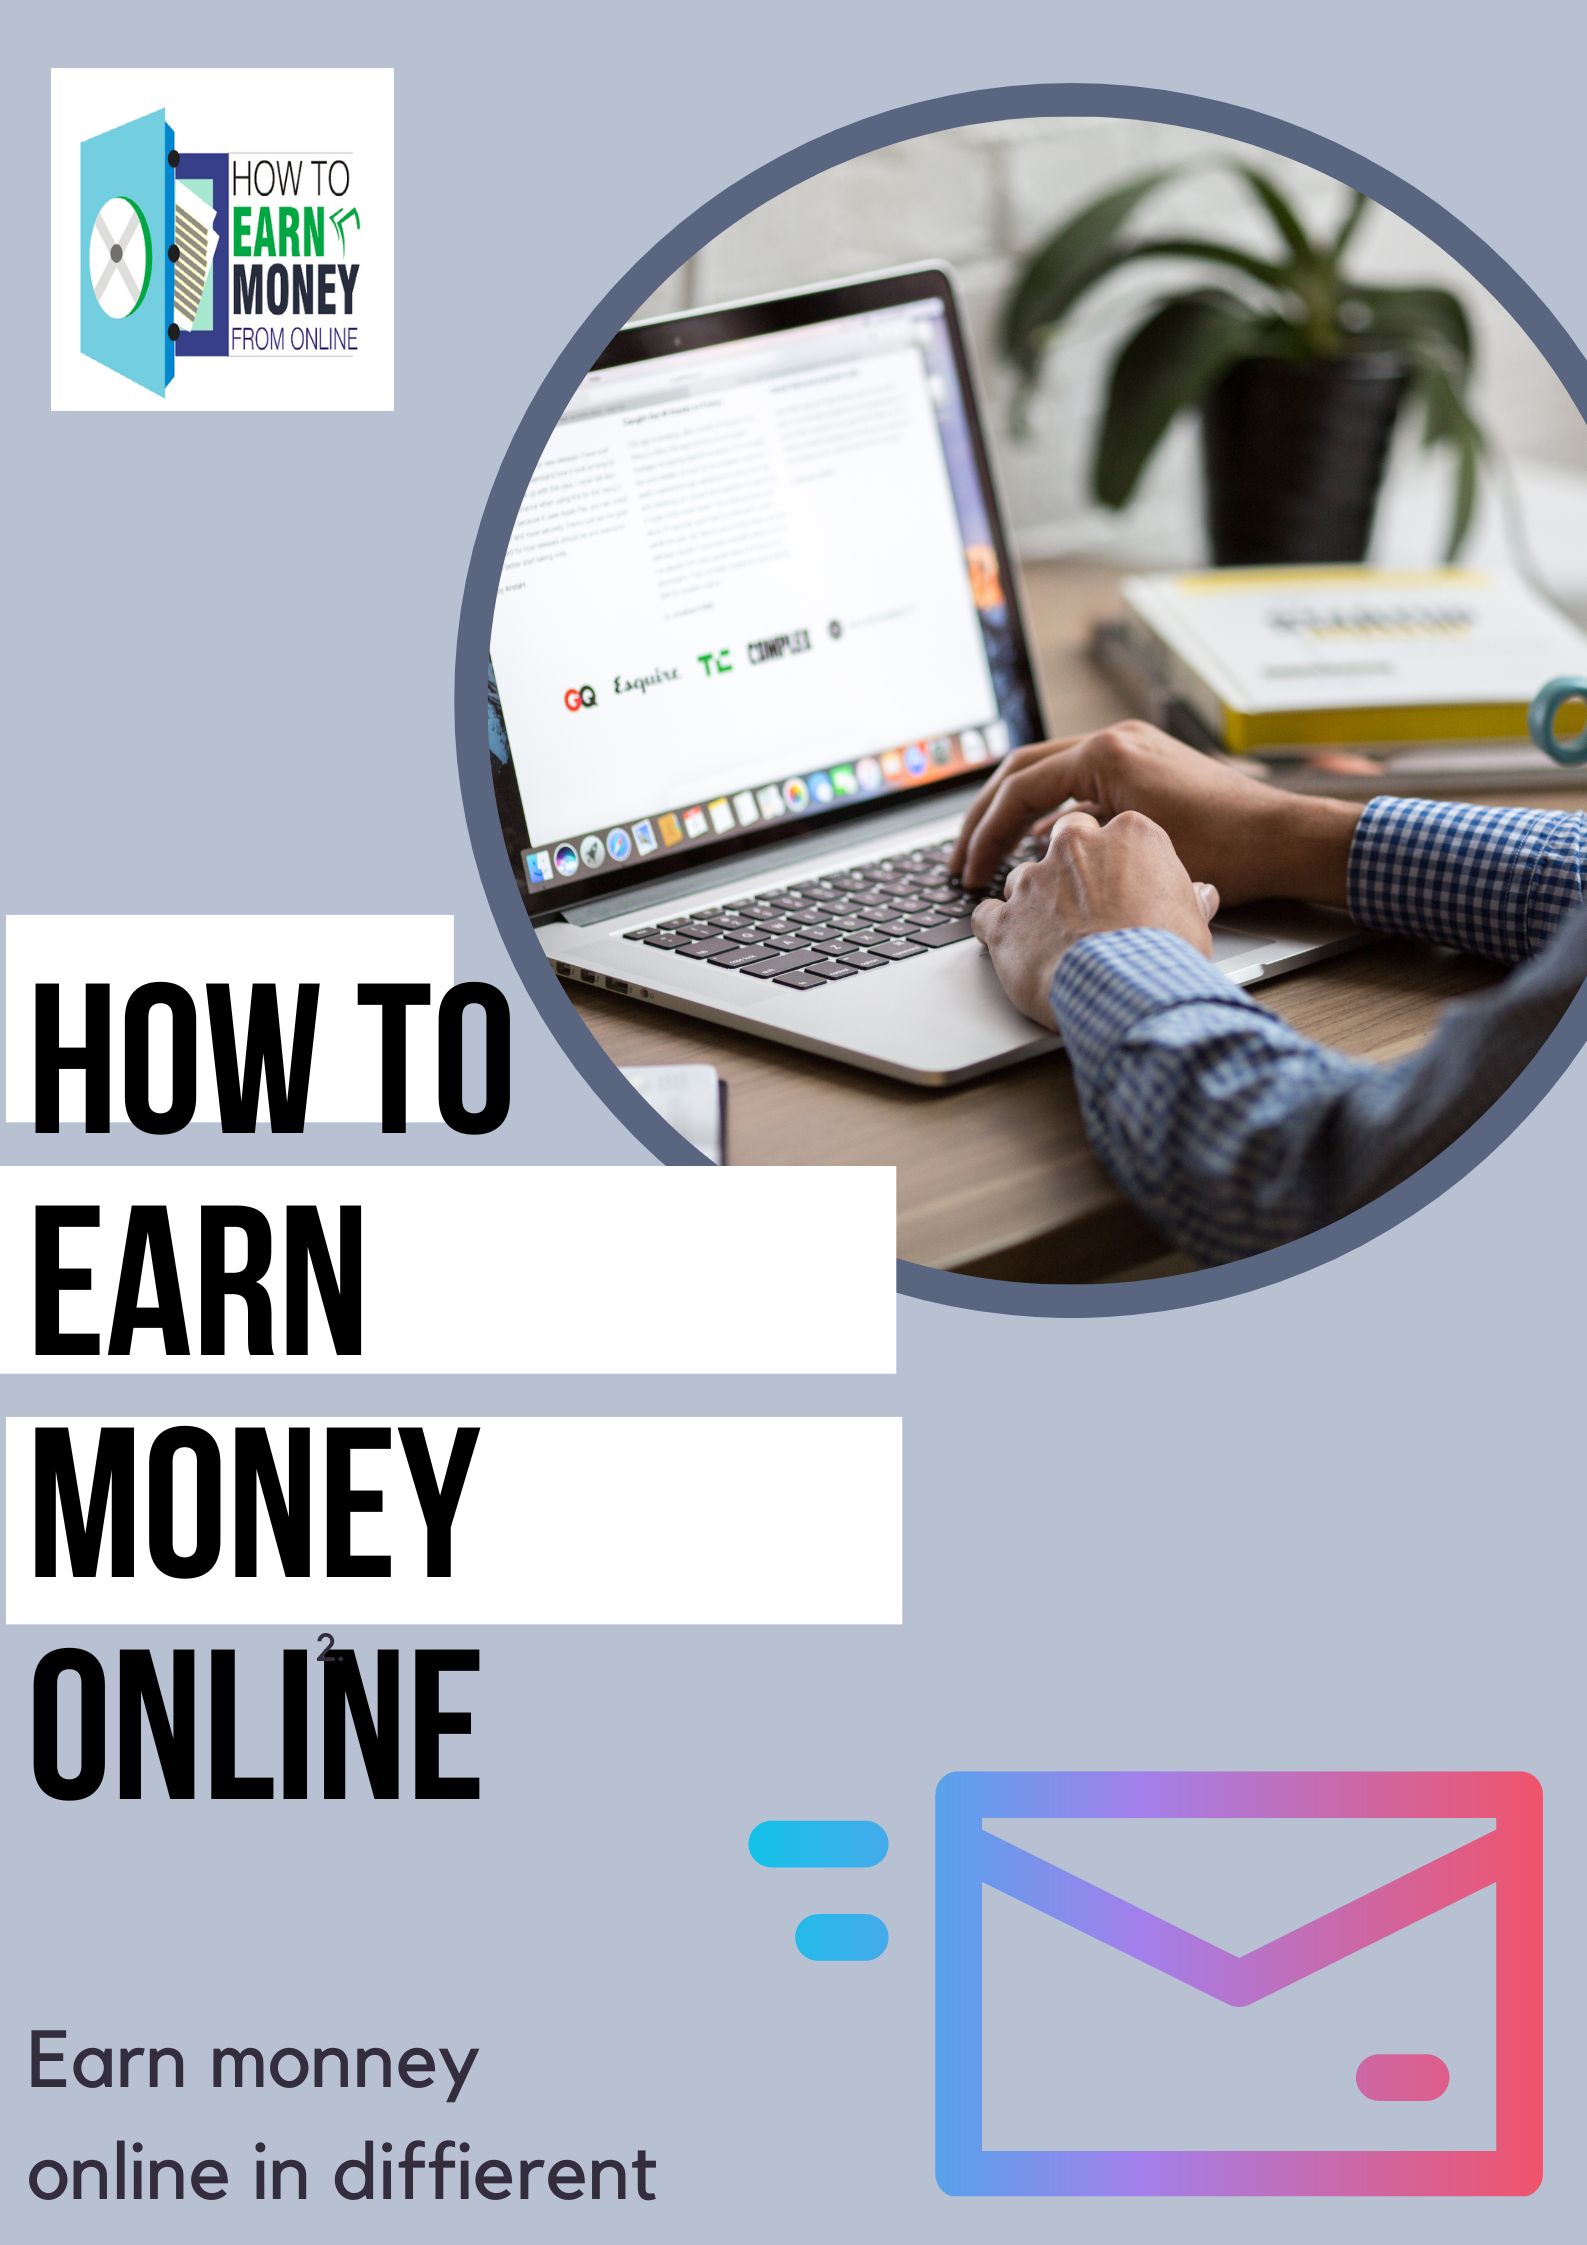 Read emails to earn cash online (How to earn money online)